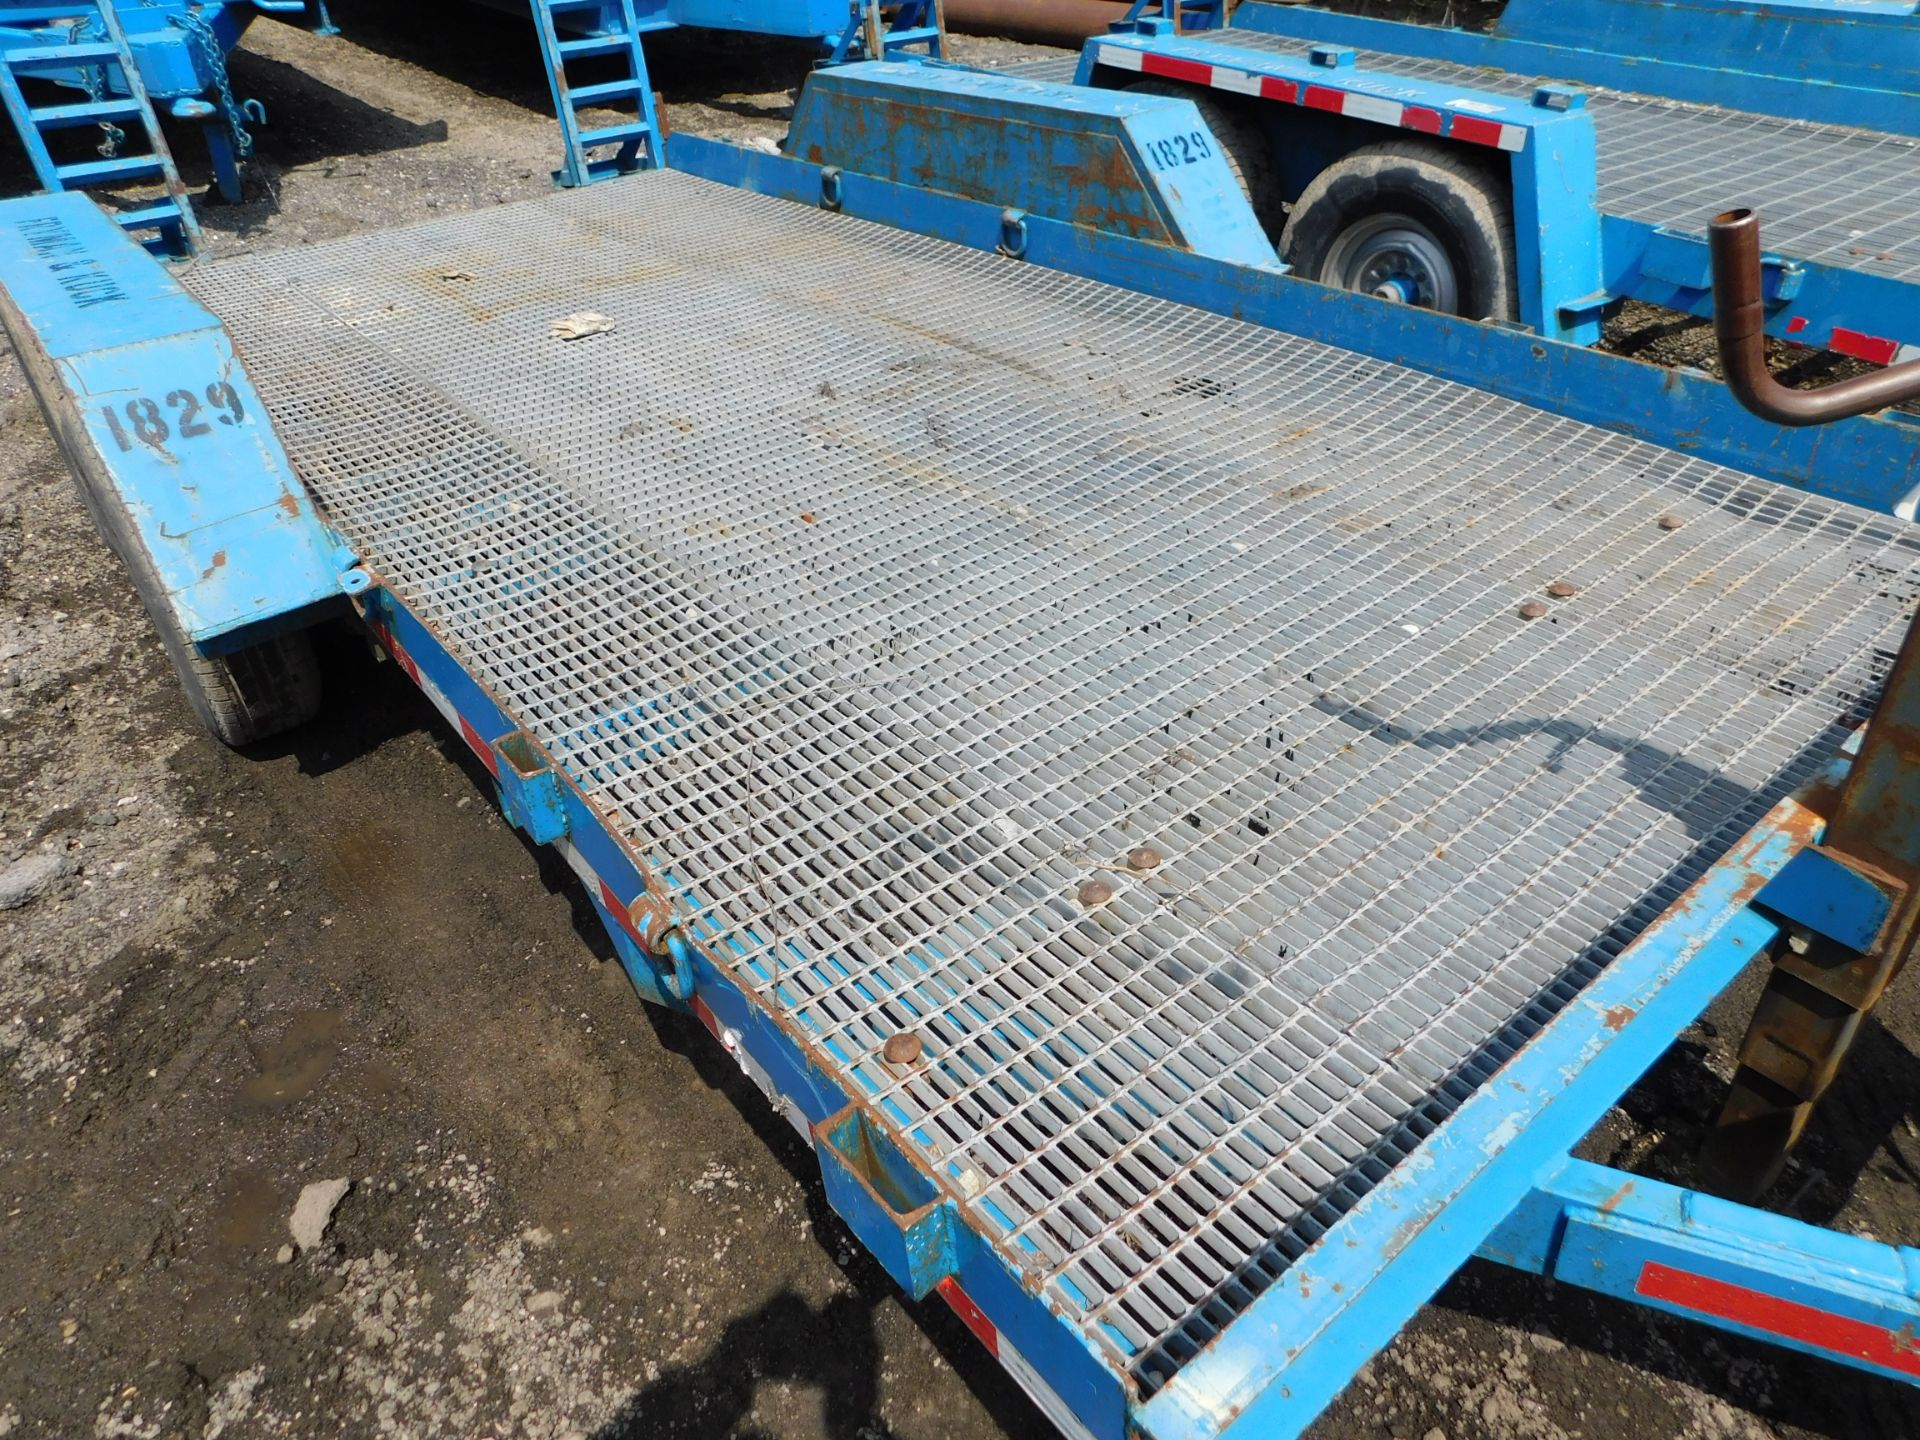 7'W x 15' Long Trailer with Grated Deck, Pintle Hitch, Ramps, Tandem Axle - Image 2 of 9